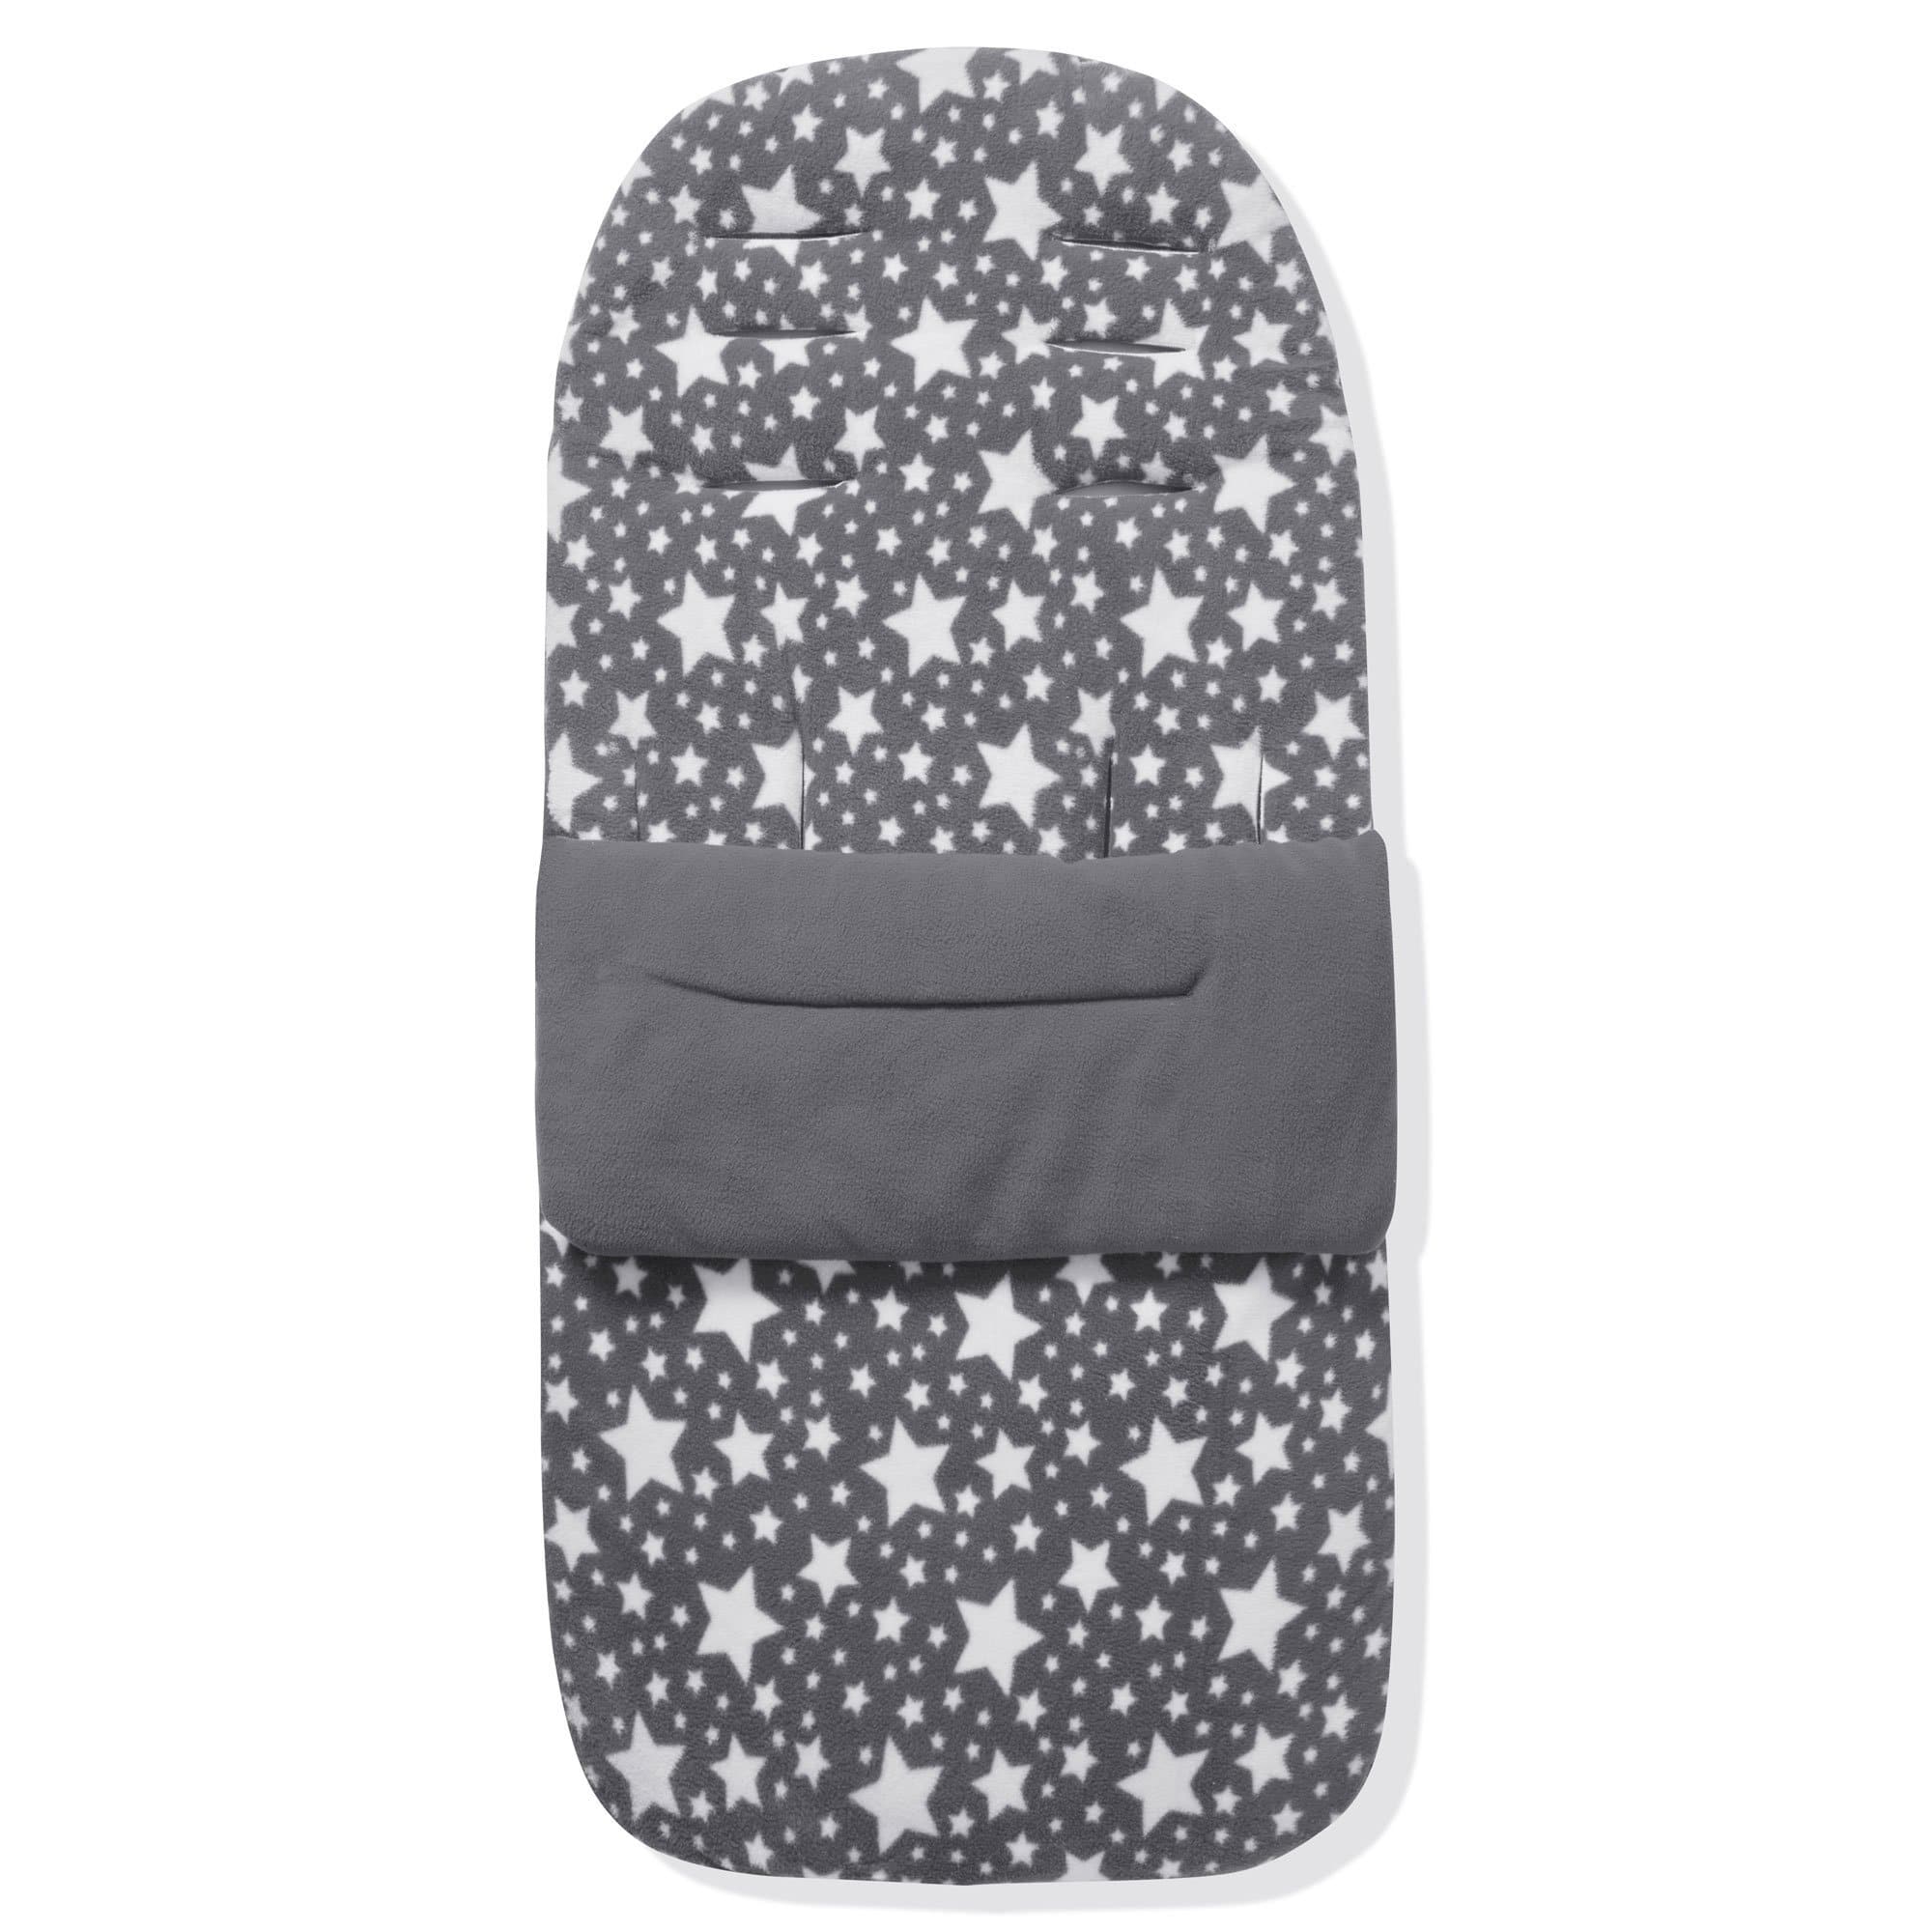 Fleece Footmuff / Cosy Toes Compatible With Britax - Grey Star / Fits All Models | For Your Little One